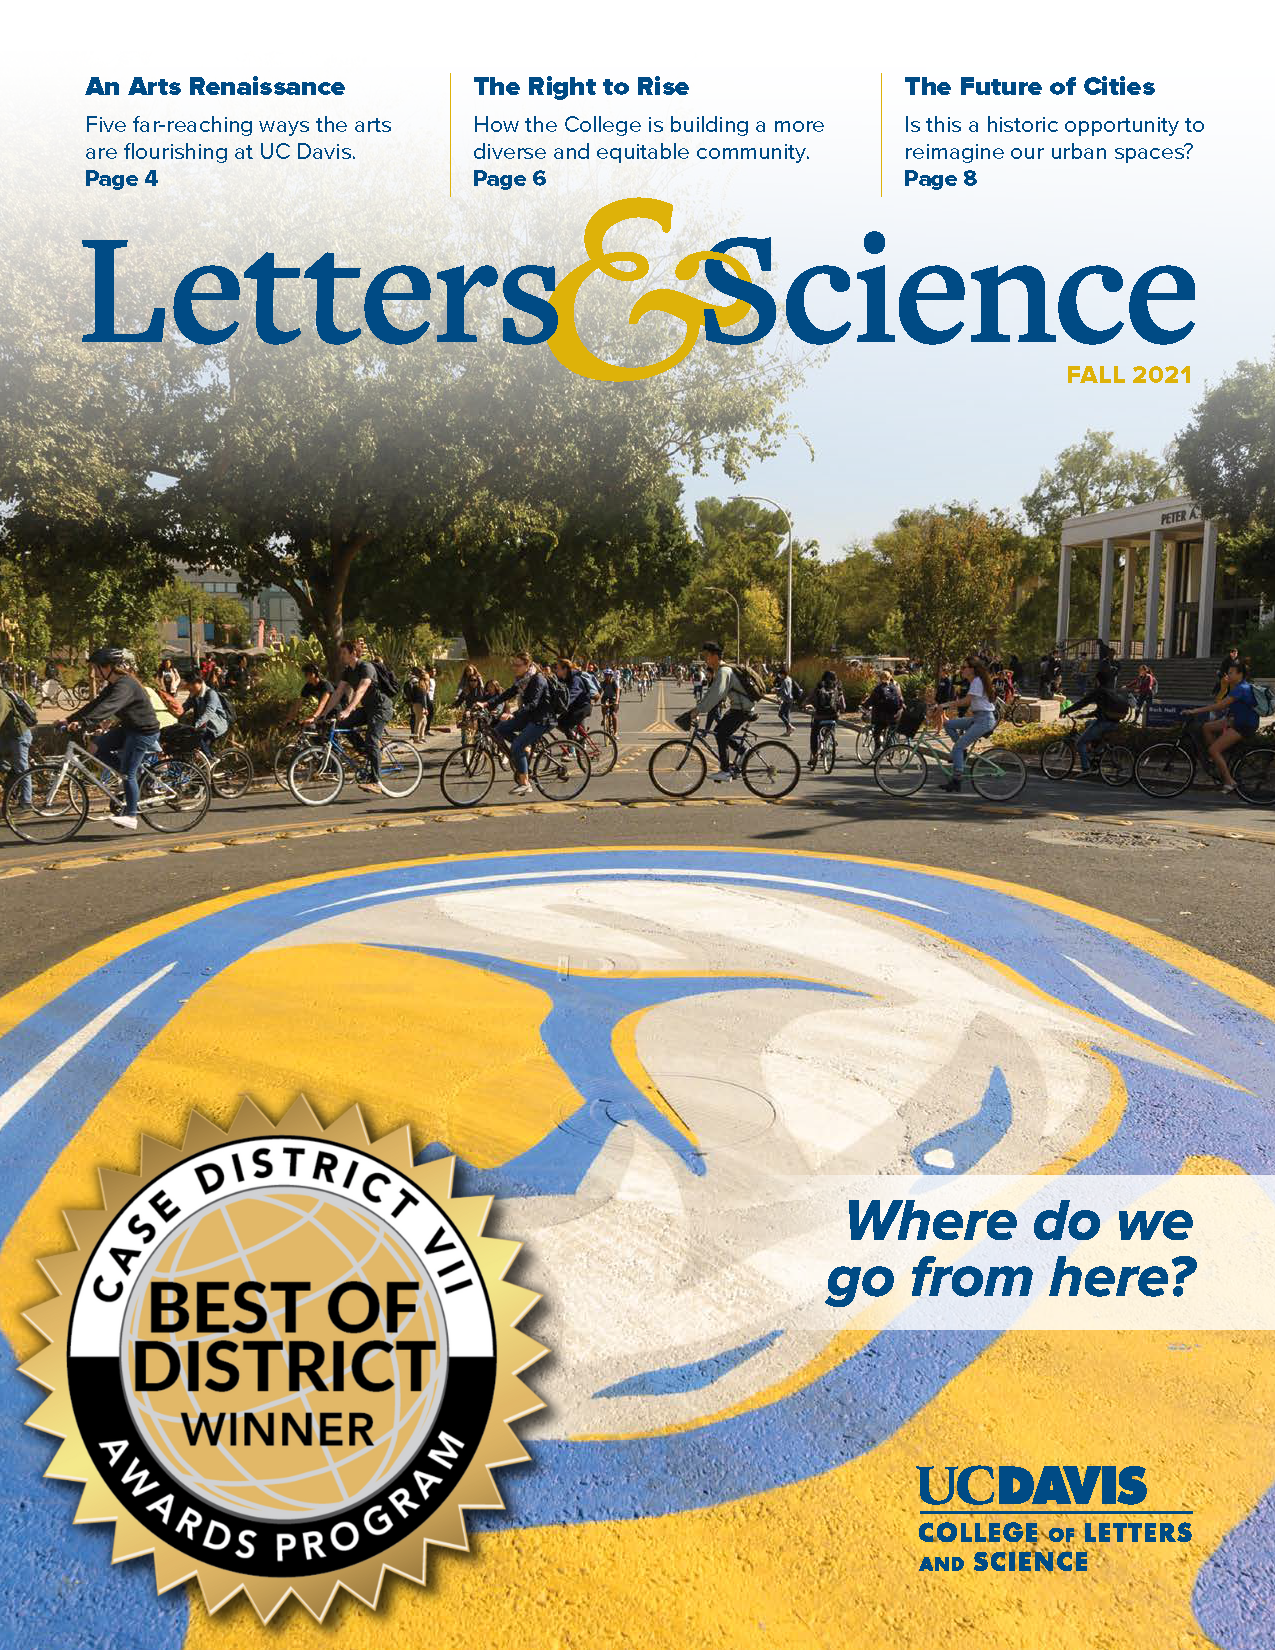 Magazine cover with photo of bicycle riders pedaling around a UC Davis traffic circle with the Gunrock mascot painted in the middle. Cover also bears seal for council for Advancement & Support of Education District VII "Best of District" award